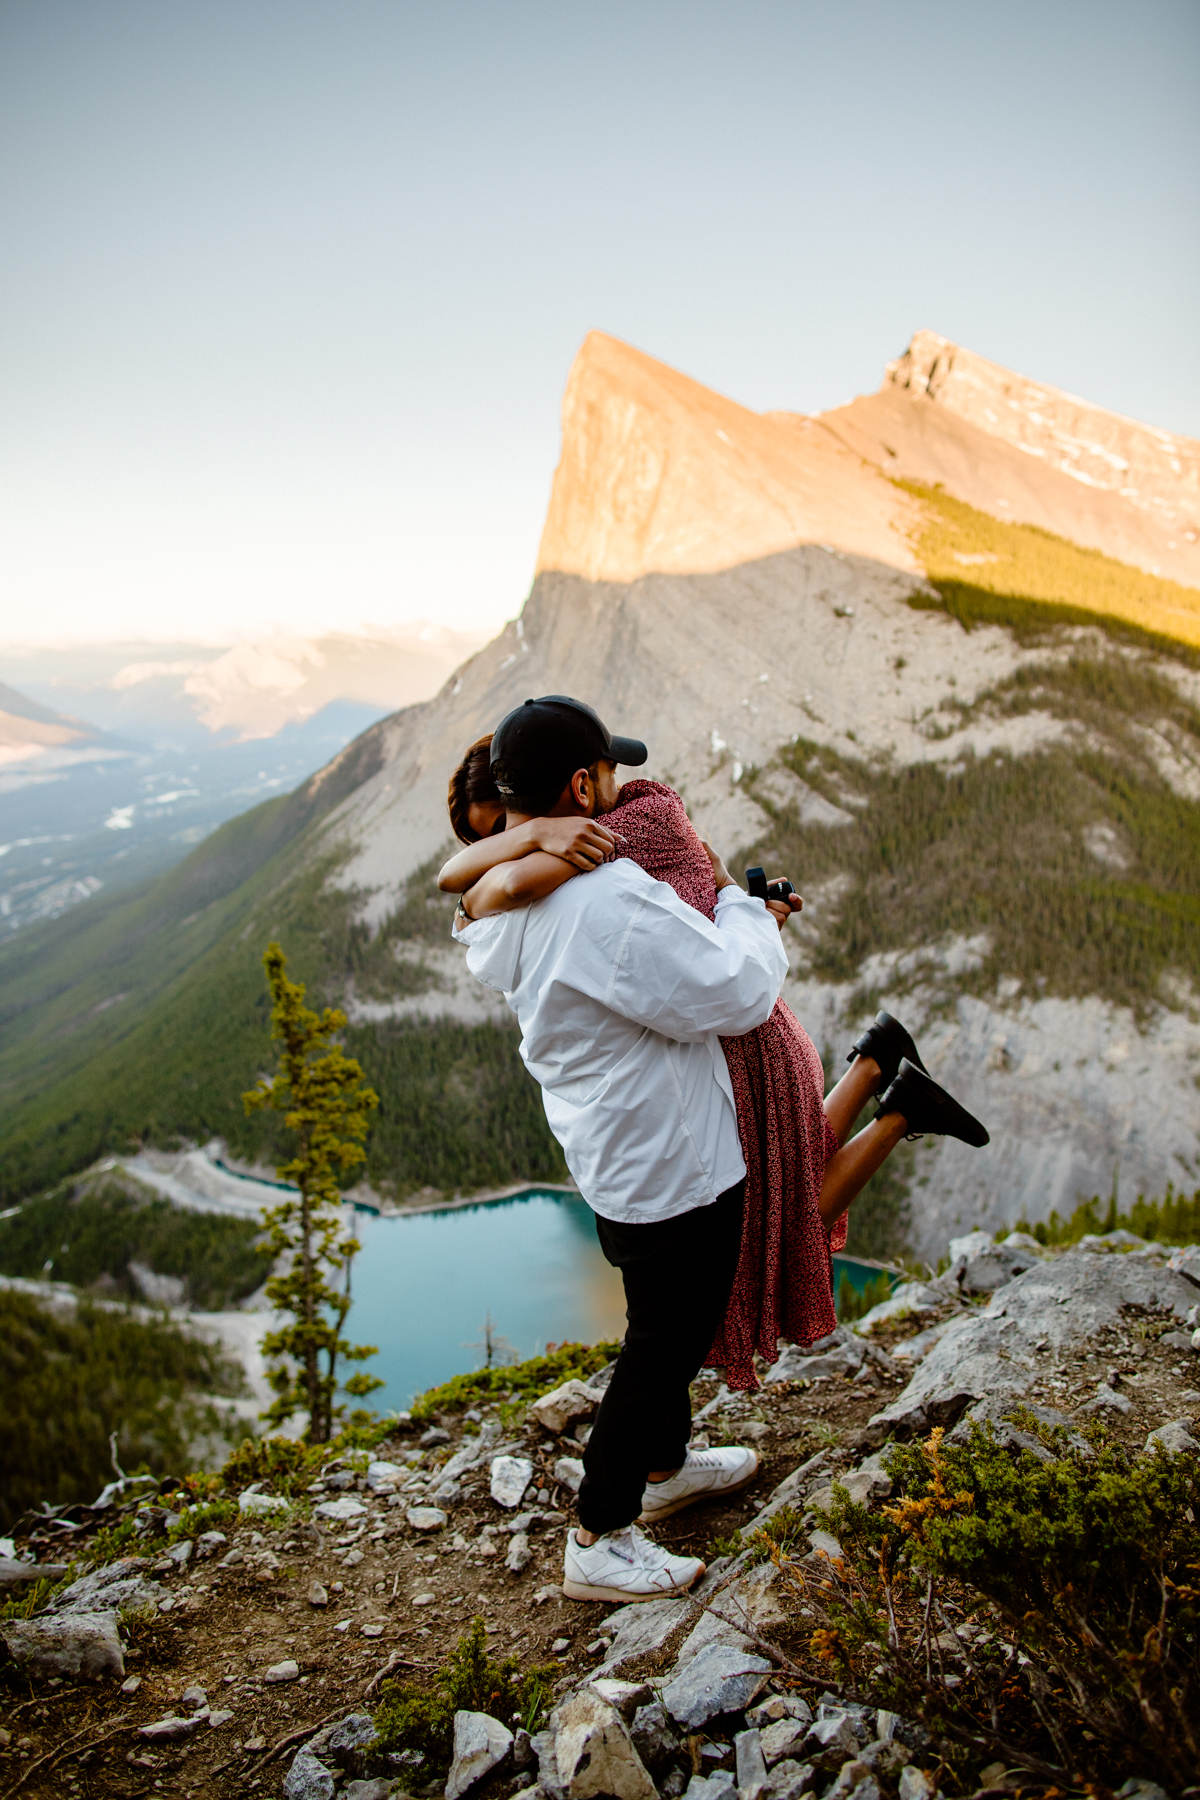 Surprise proposal photographers in Banff on East End of Rundle with views of Ha Ling hike in Canmore